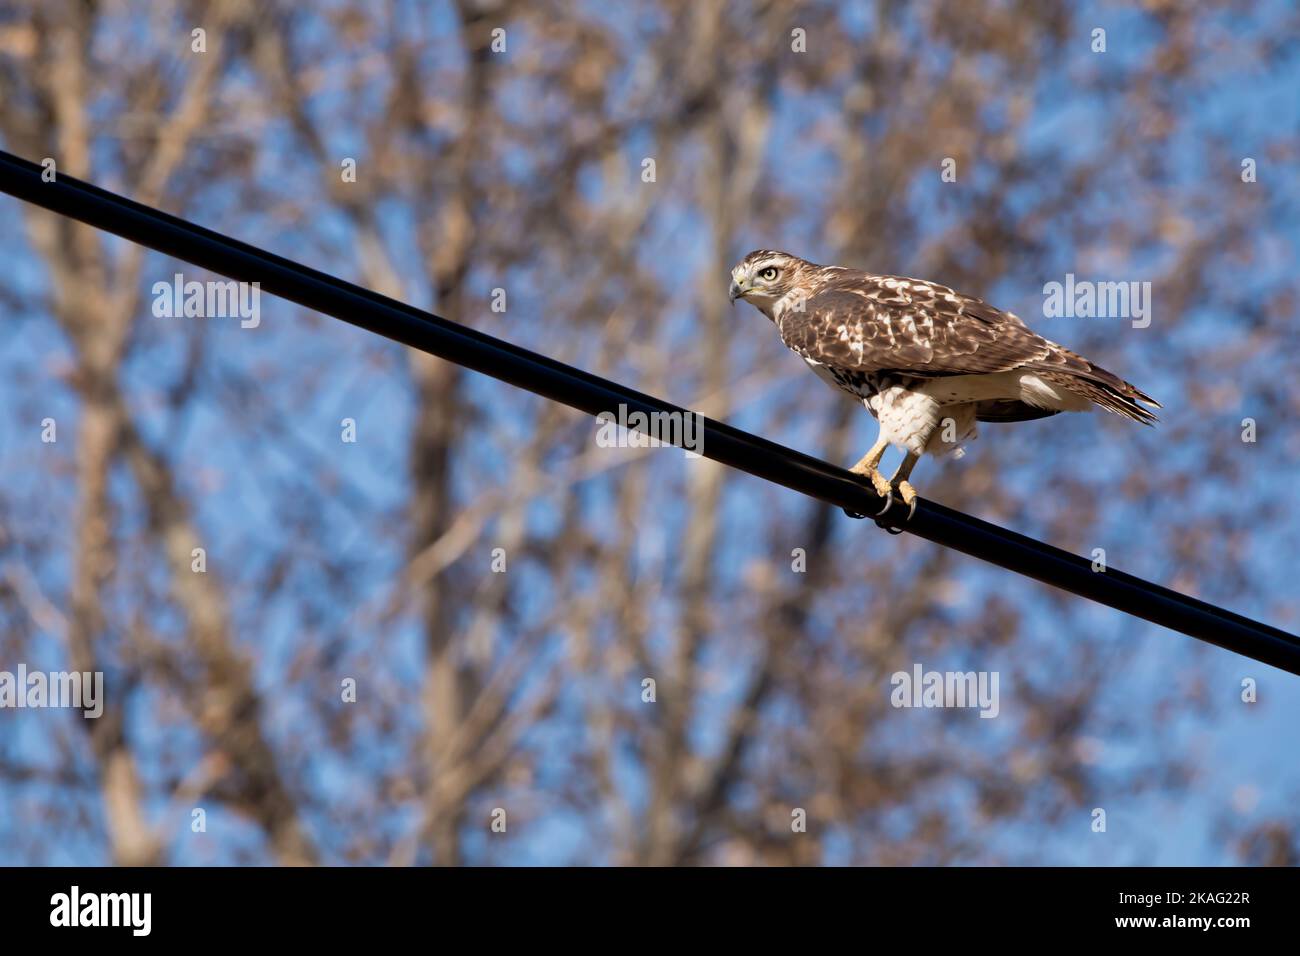 A young Cooper's hawk, accipiter cooperii, perches on a wire with blurred trees in the background on an autumn day in Iowa. Stock Photo